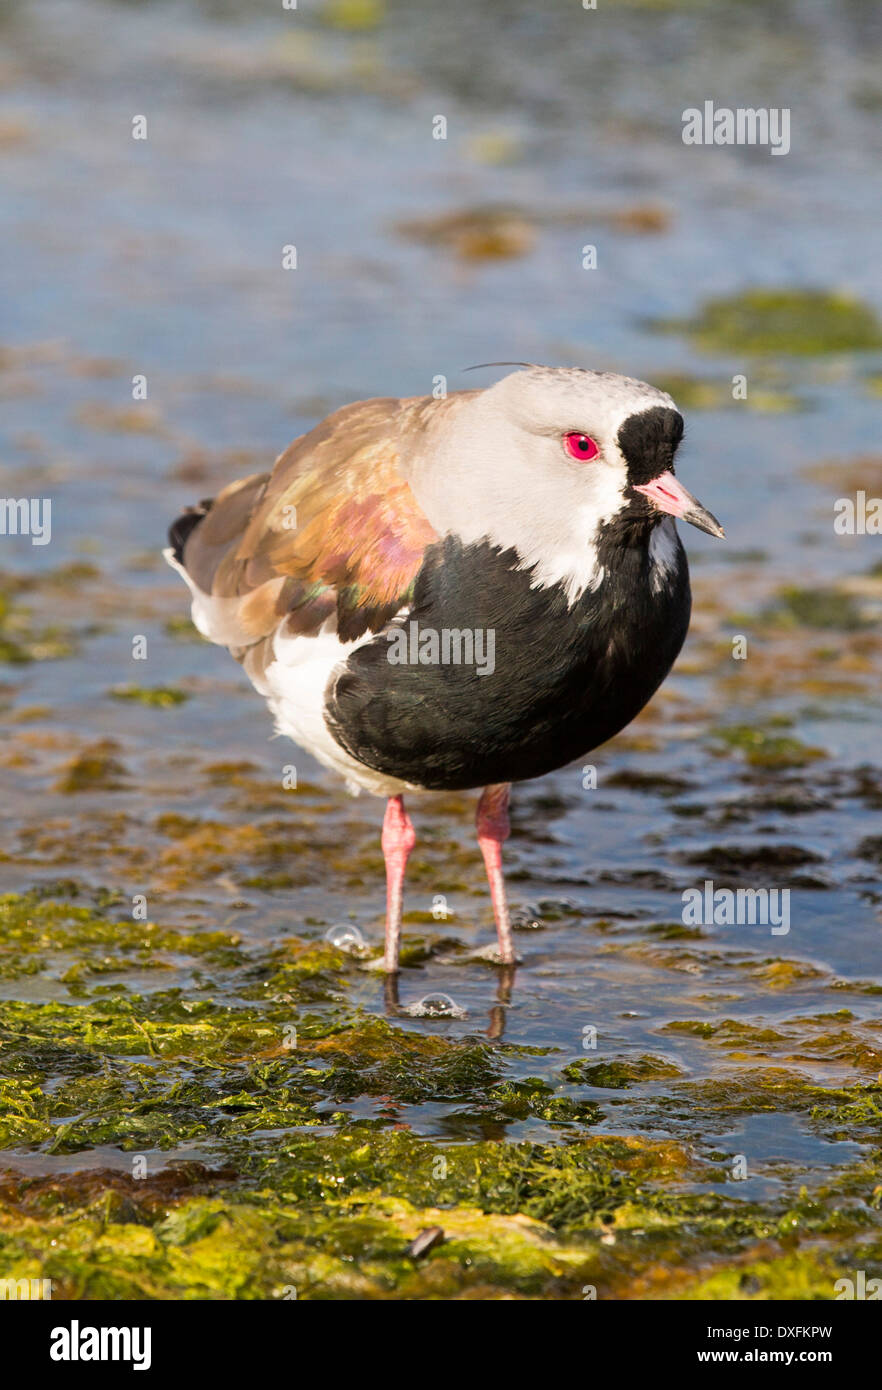 A Southern Lapwing, Vanellus chilensis in Ushuaia, Tierra Del Fuego, Argentina. Stock Photo